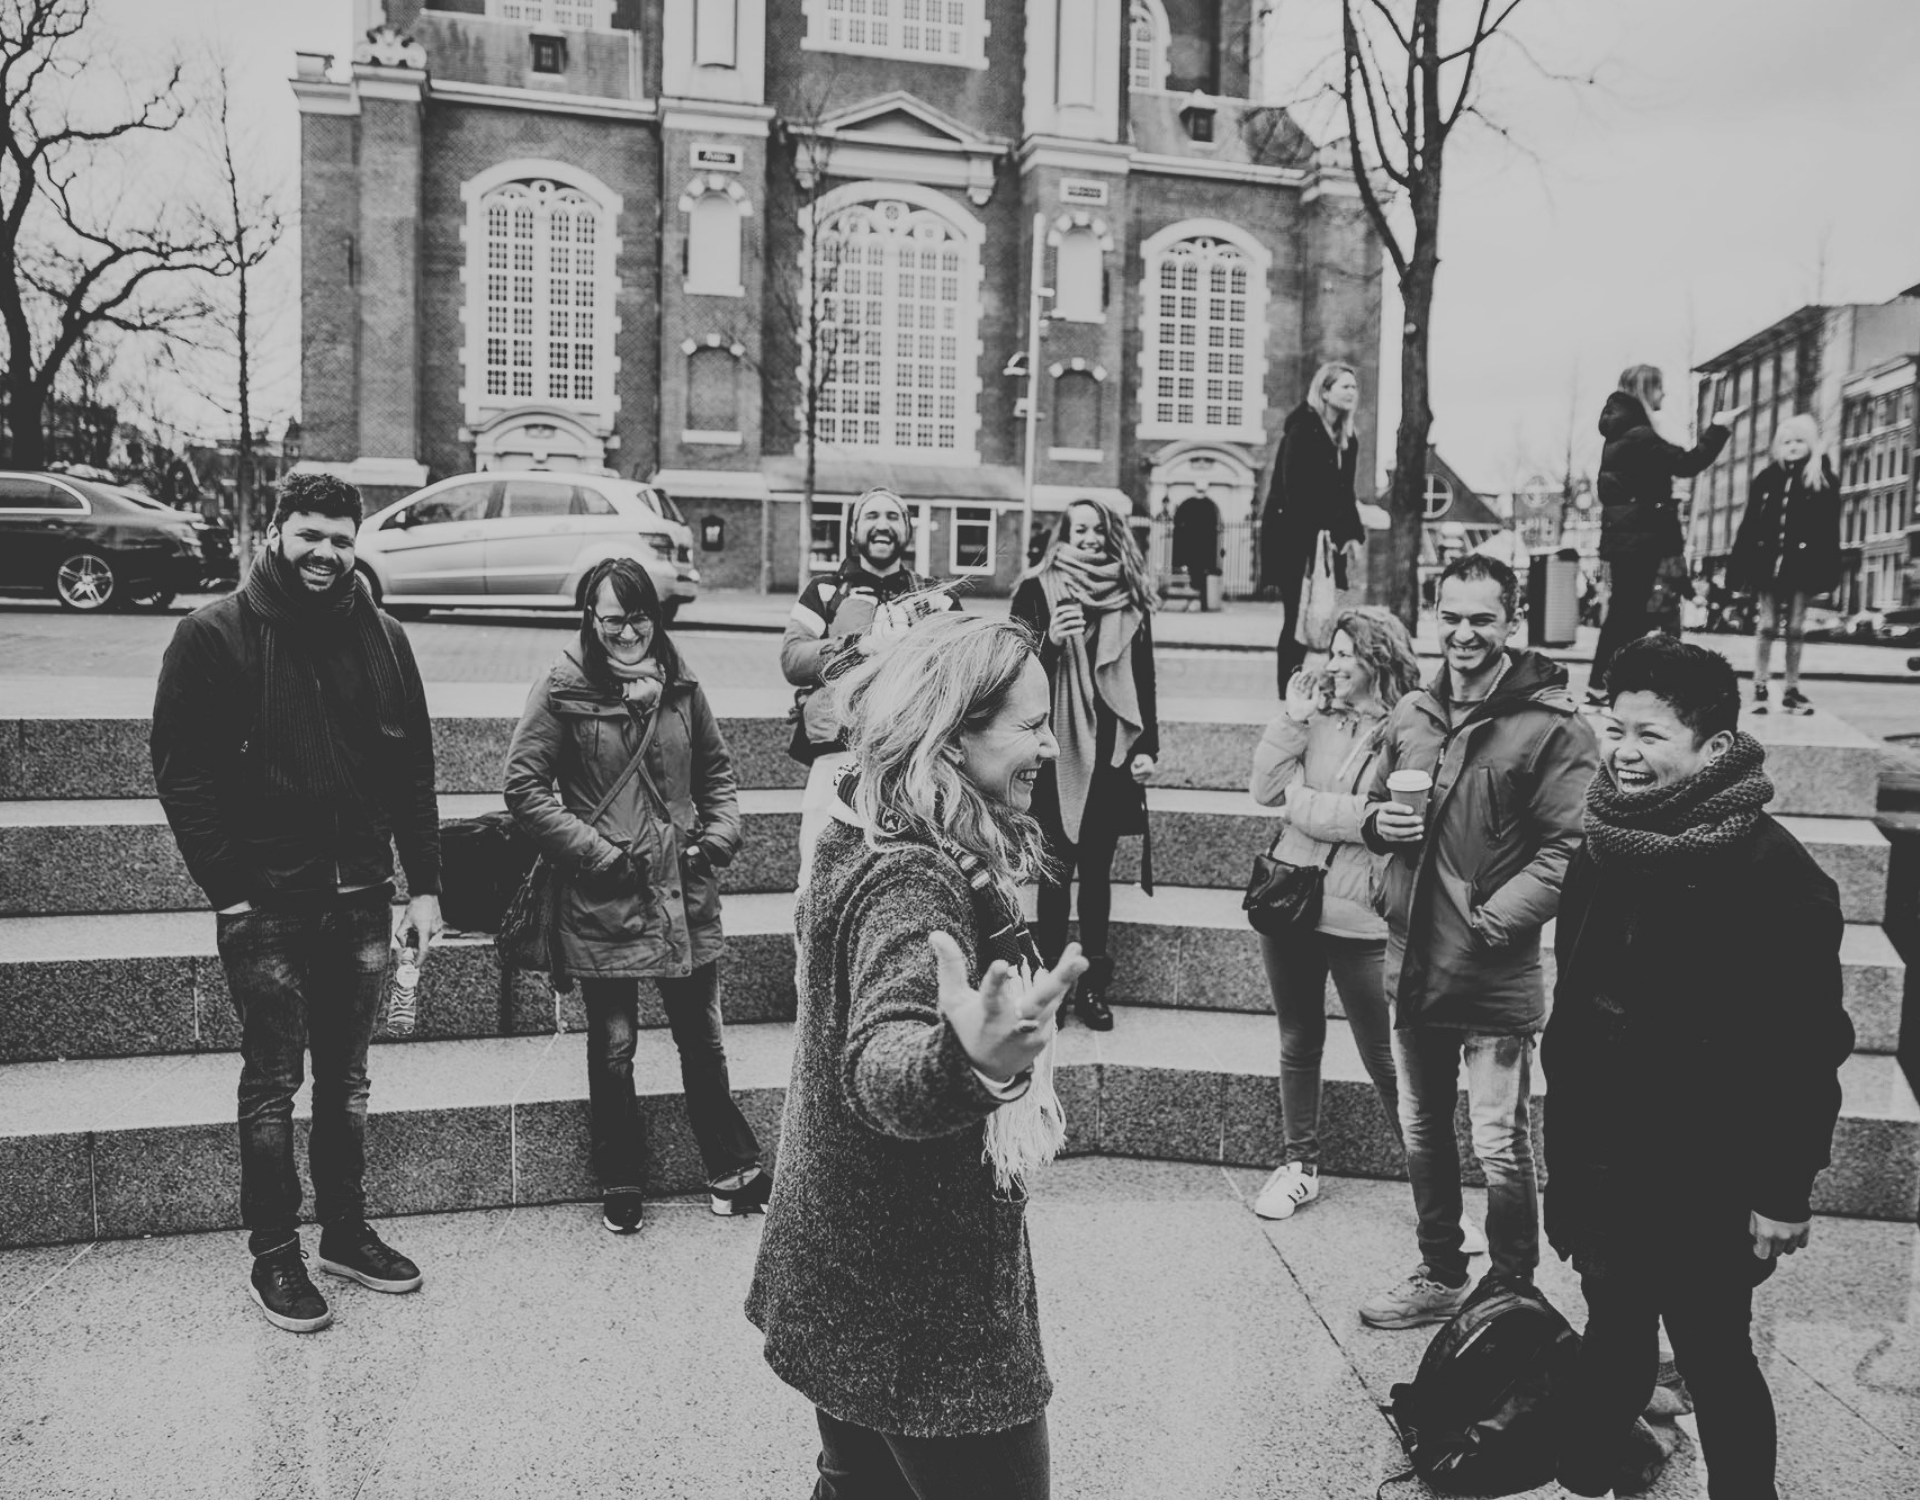 a tour guide speaking to a group at Homomonument Amsterdam